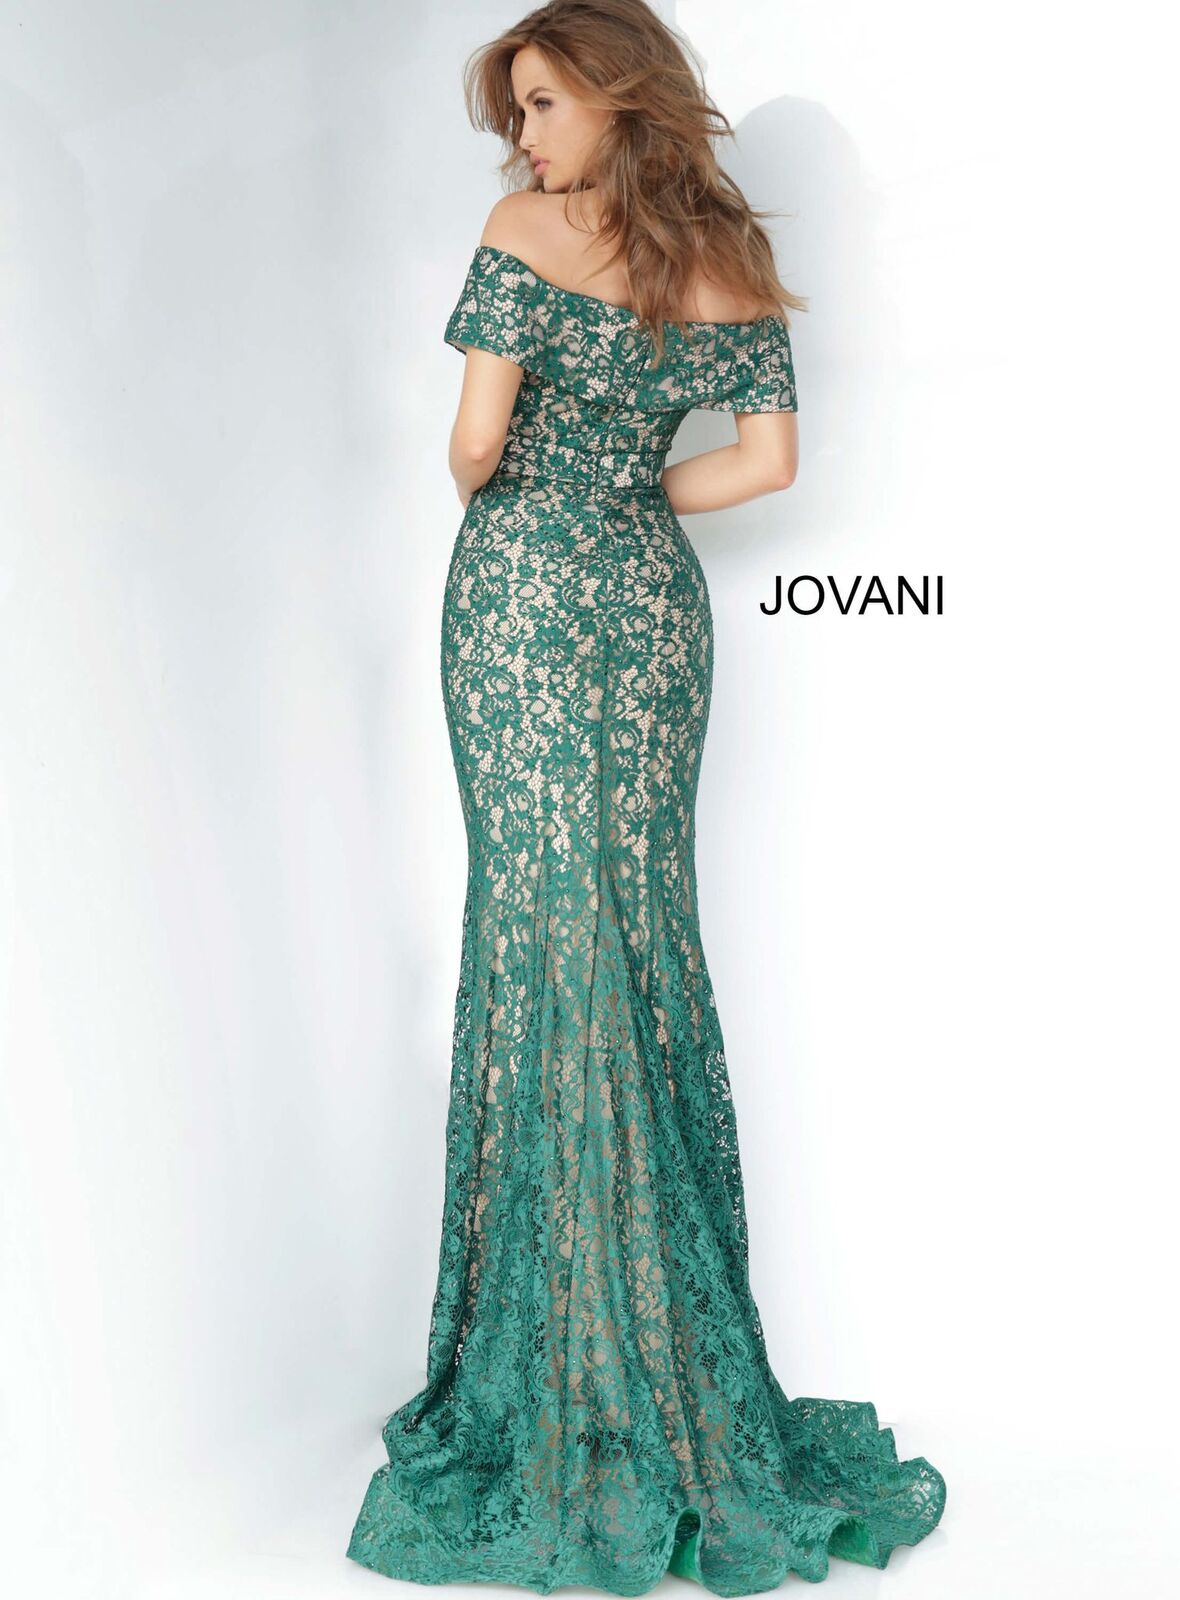 Jovani 1974 off the shoulder straps sweetheart neckline embellished lace prom dress with train evening gown mother of the bride or groom dress   Available colors:  Hunter, Navy, Red  Available sizes:  00-24 